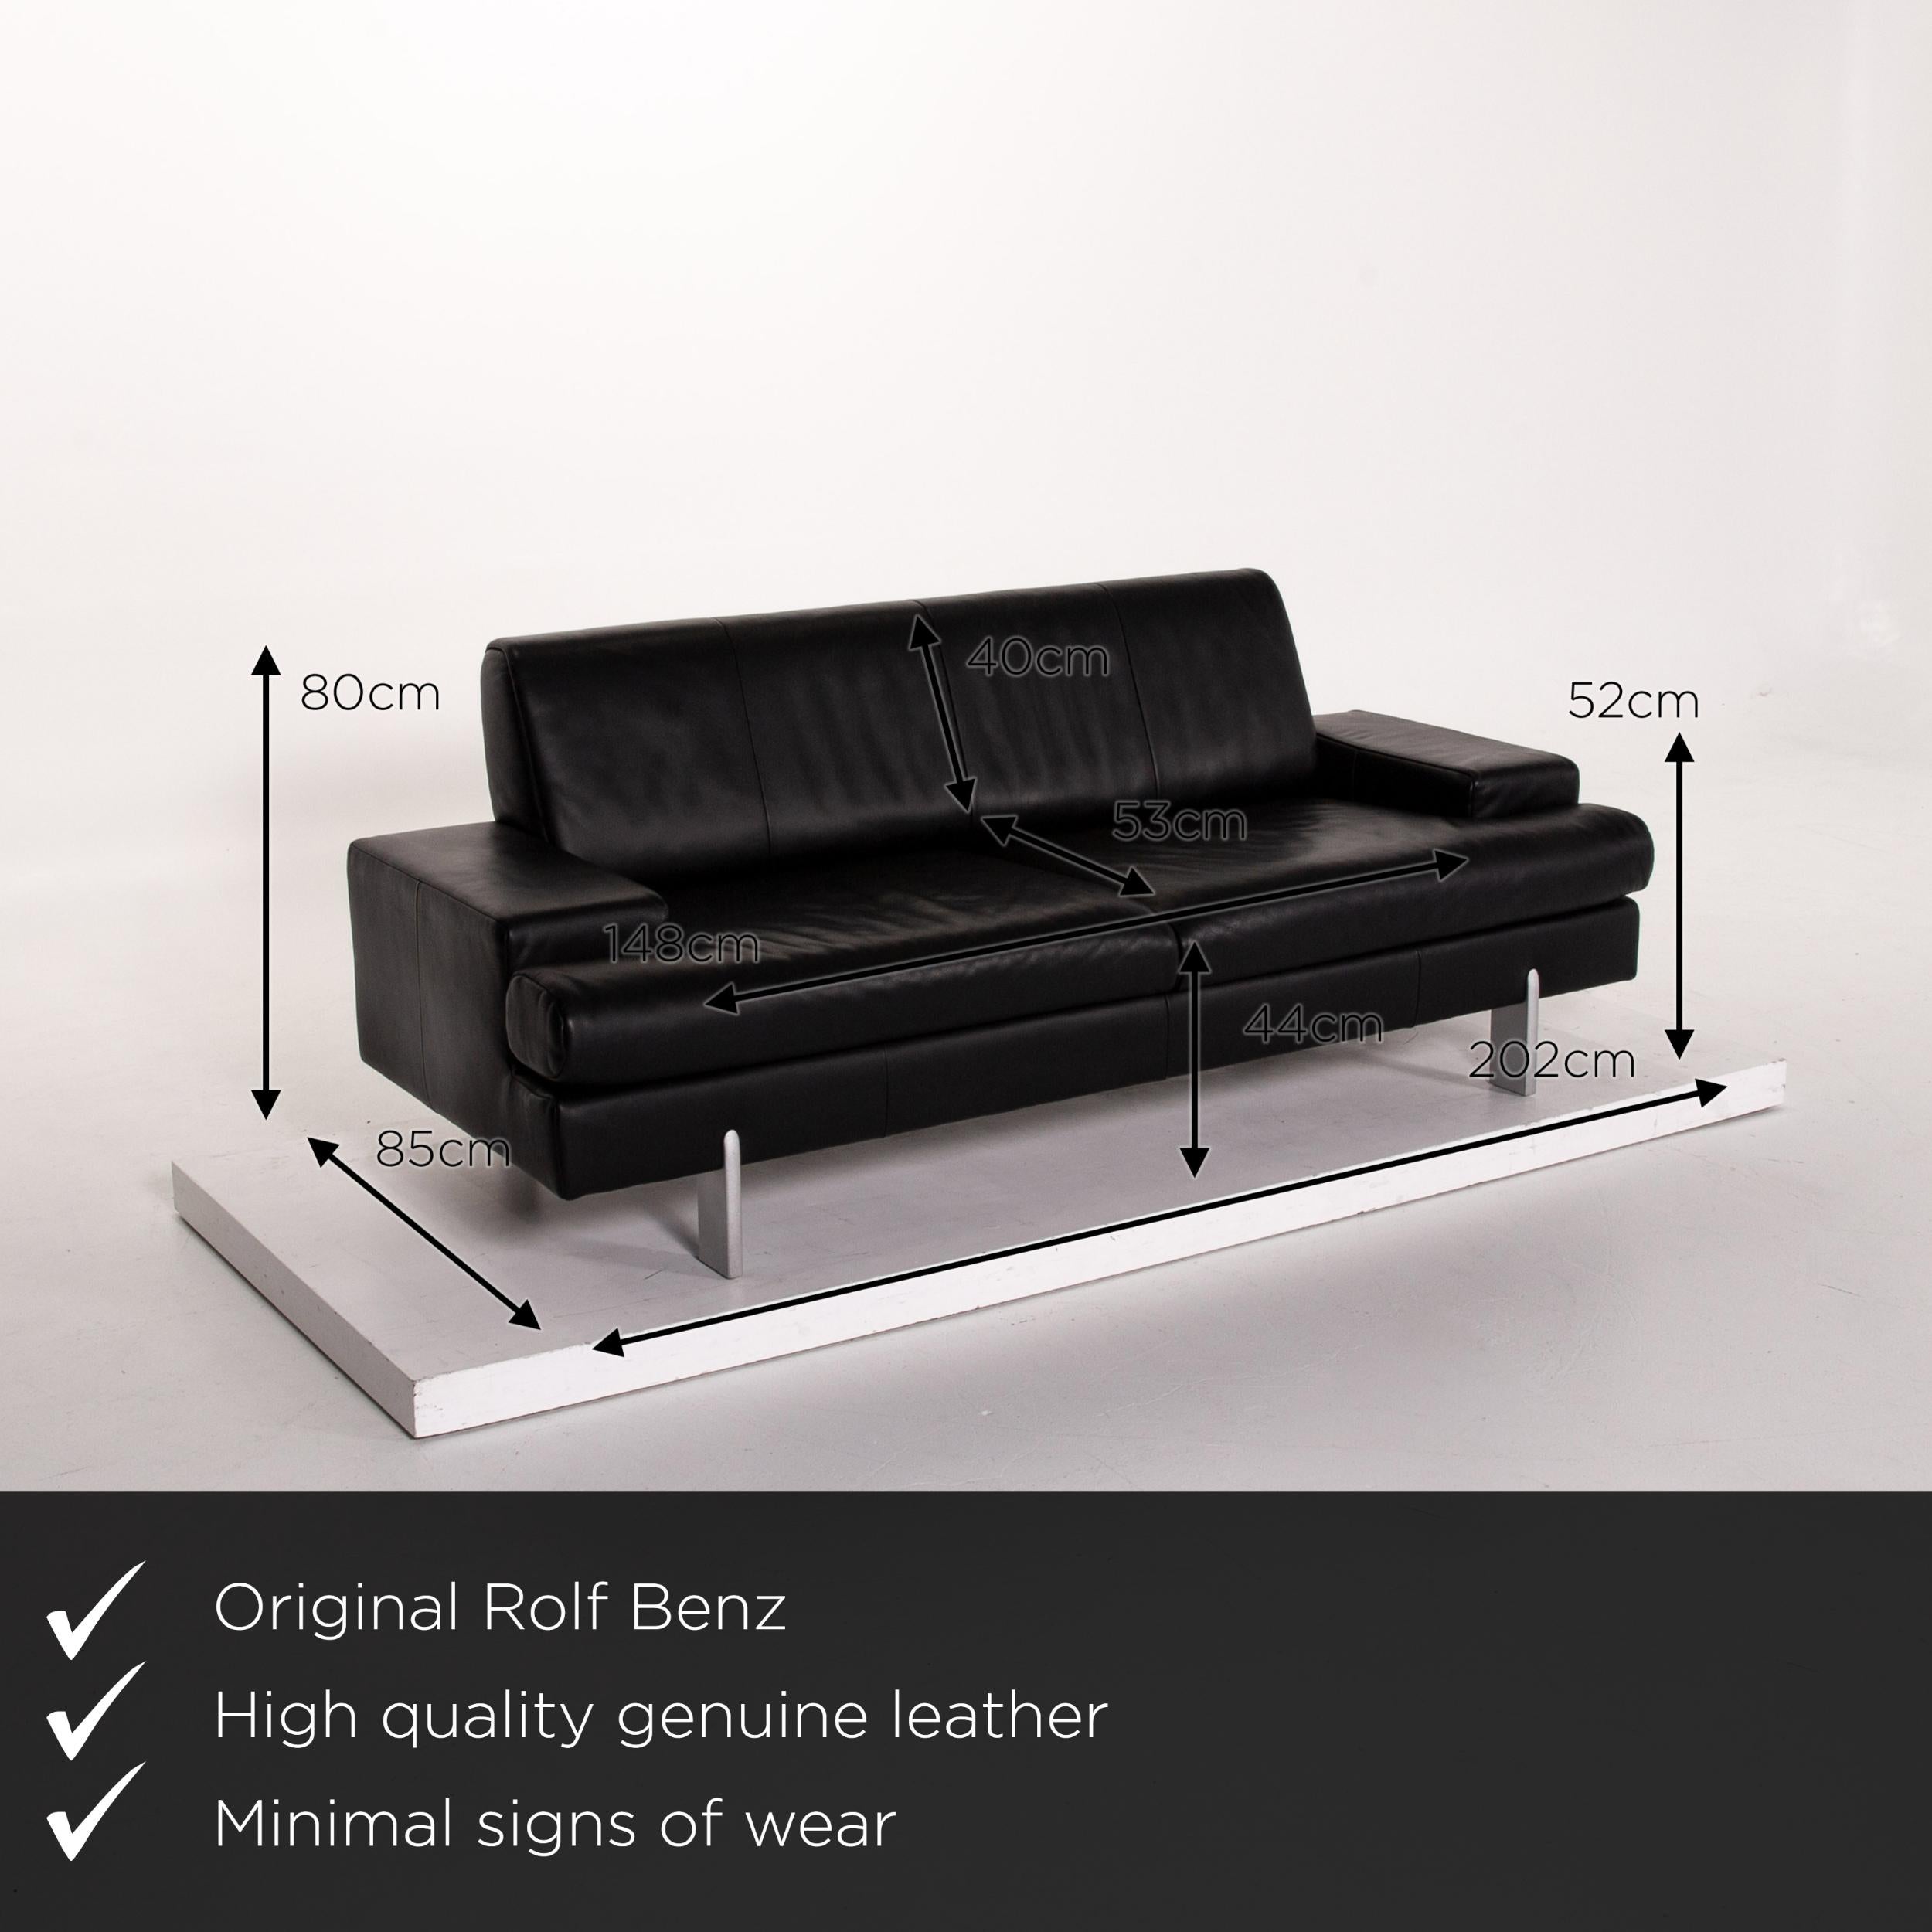 We present to you a Rolf Benz AK 644 leather sofa black three-seat couch.
  
 

 Product measurements in centimeters:
 

Depth 85
Width 202
Height 80
Seat height 44
Rest height 52
Seat depth 53
Seat width 148
Back height 40.